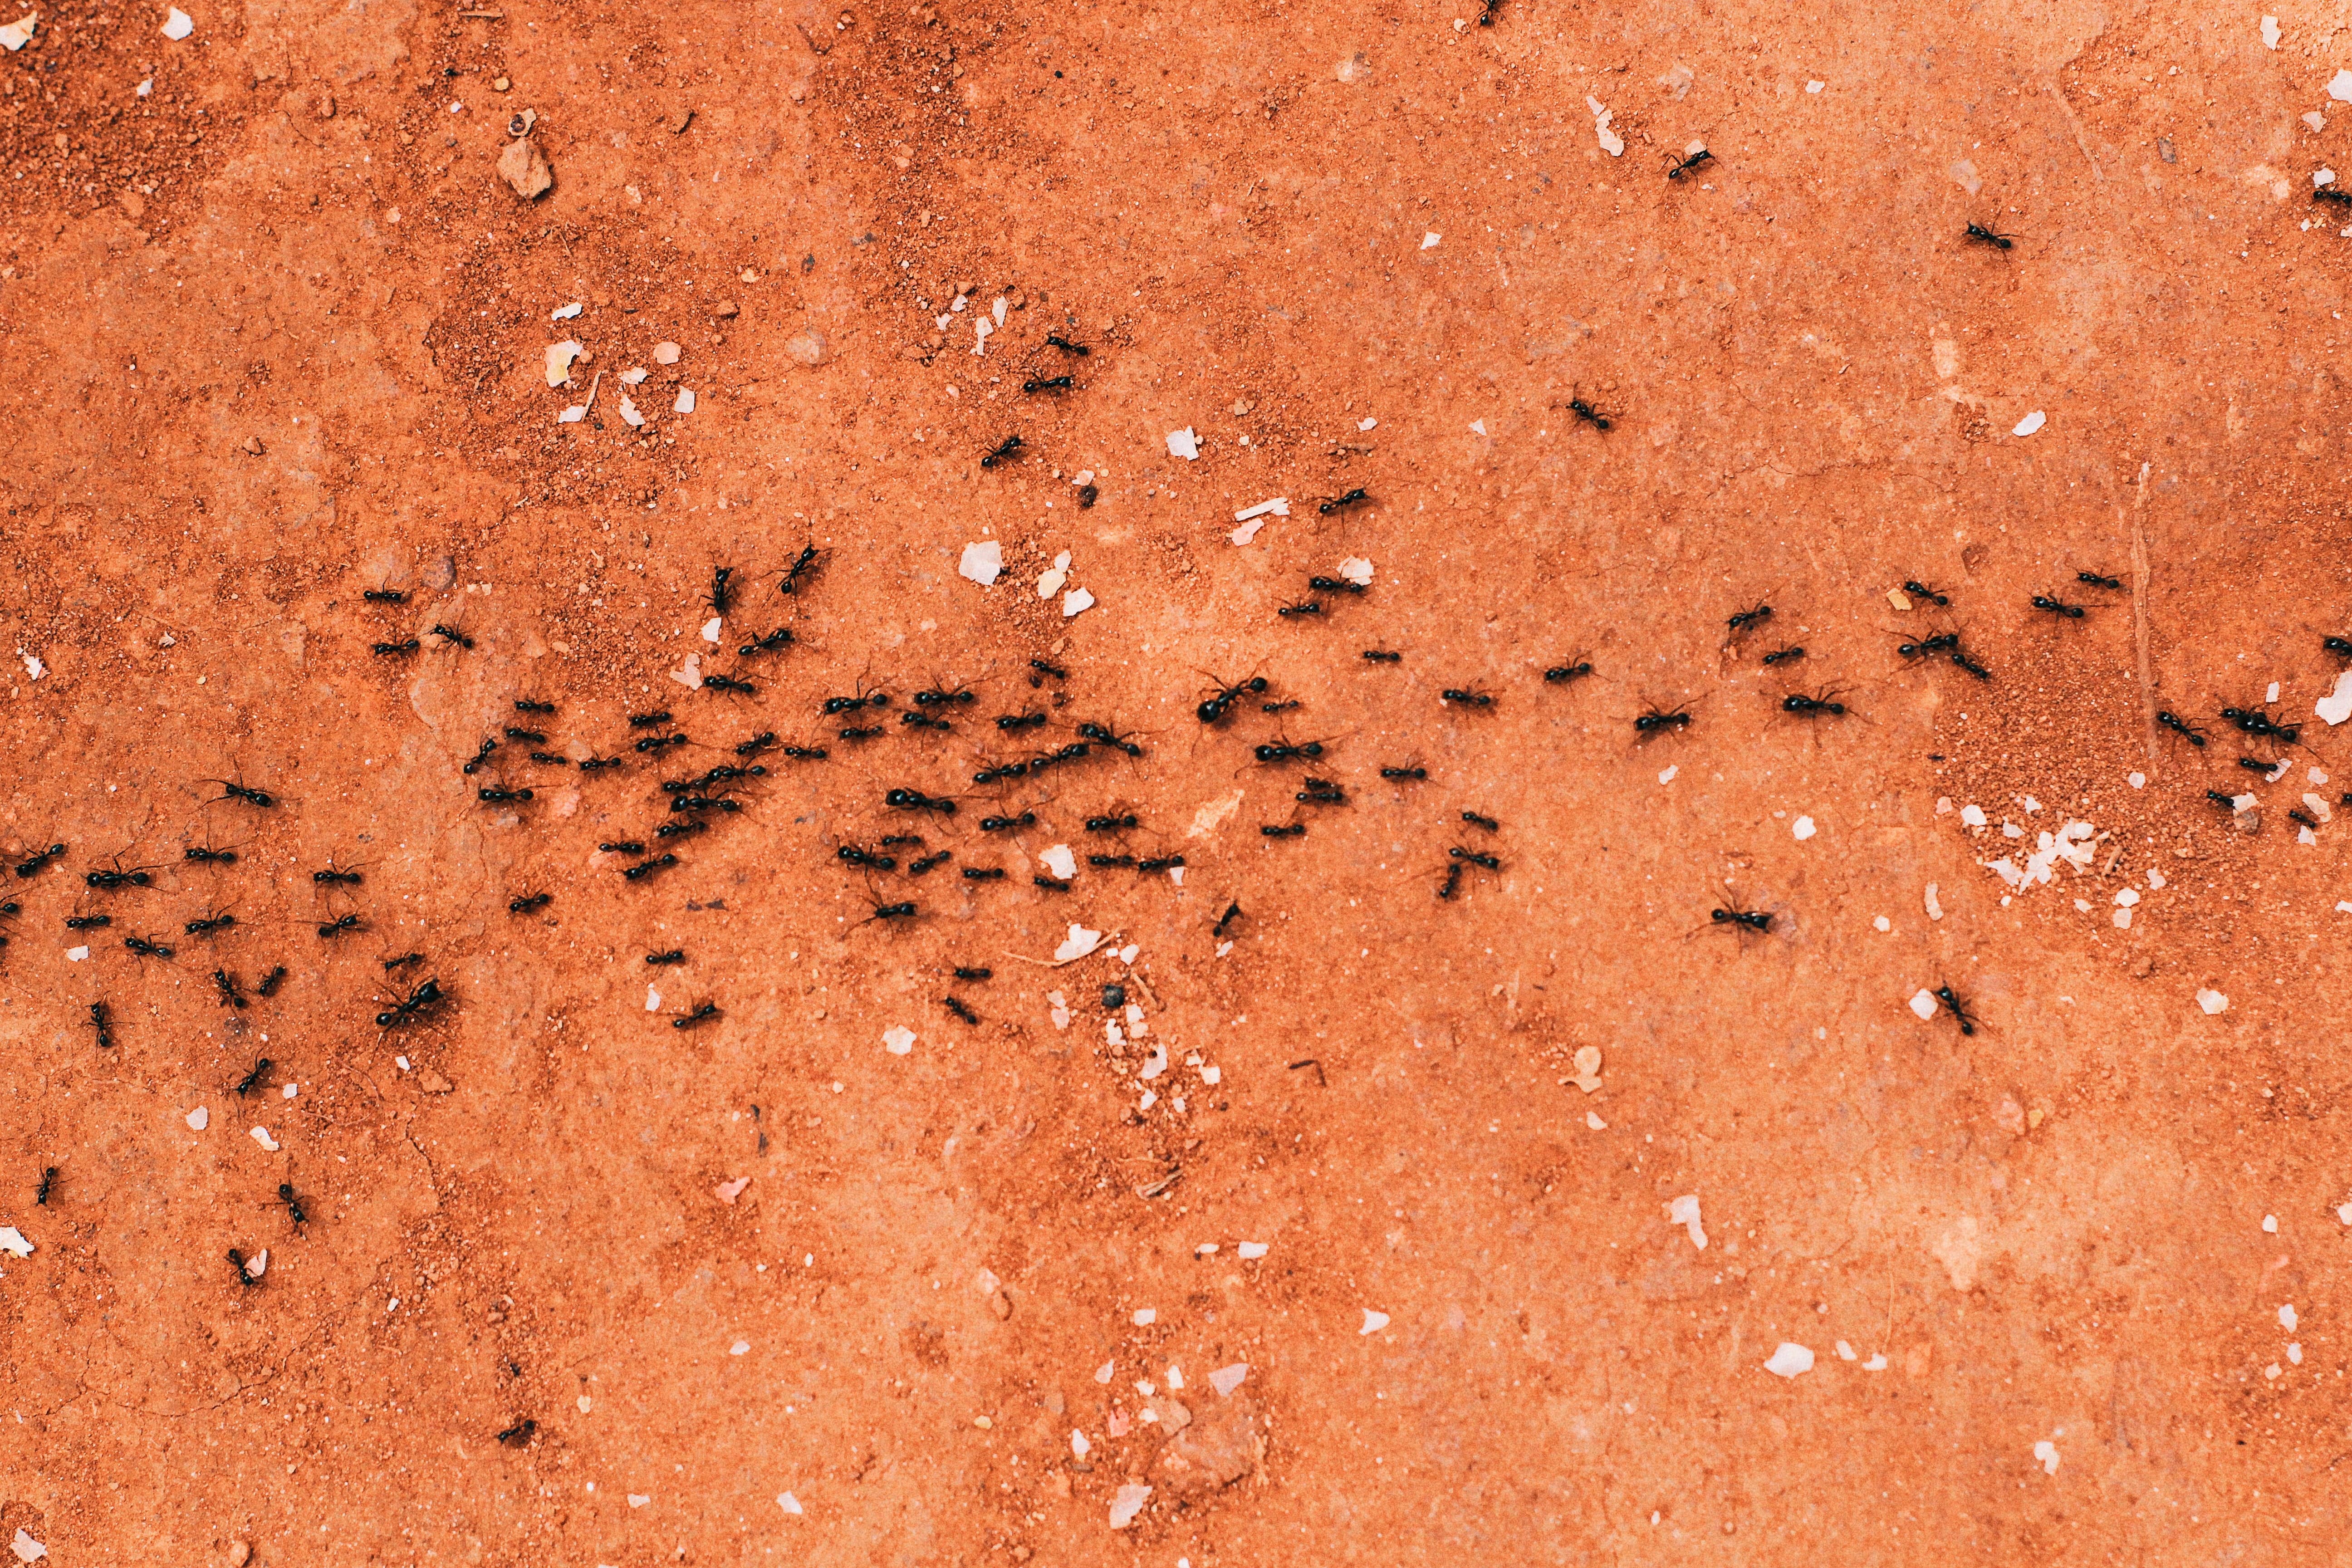 Odorous House Ants Go Marching